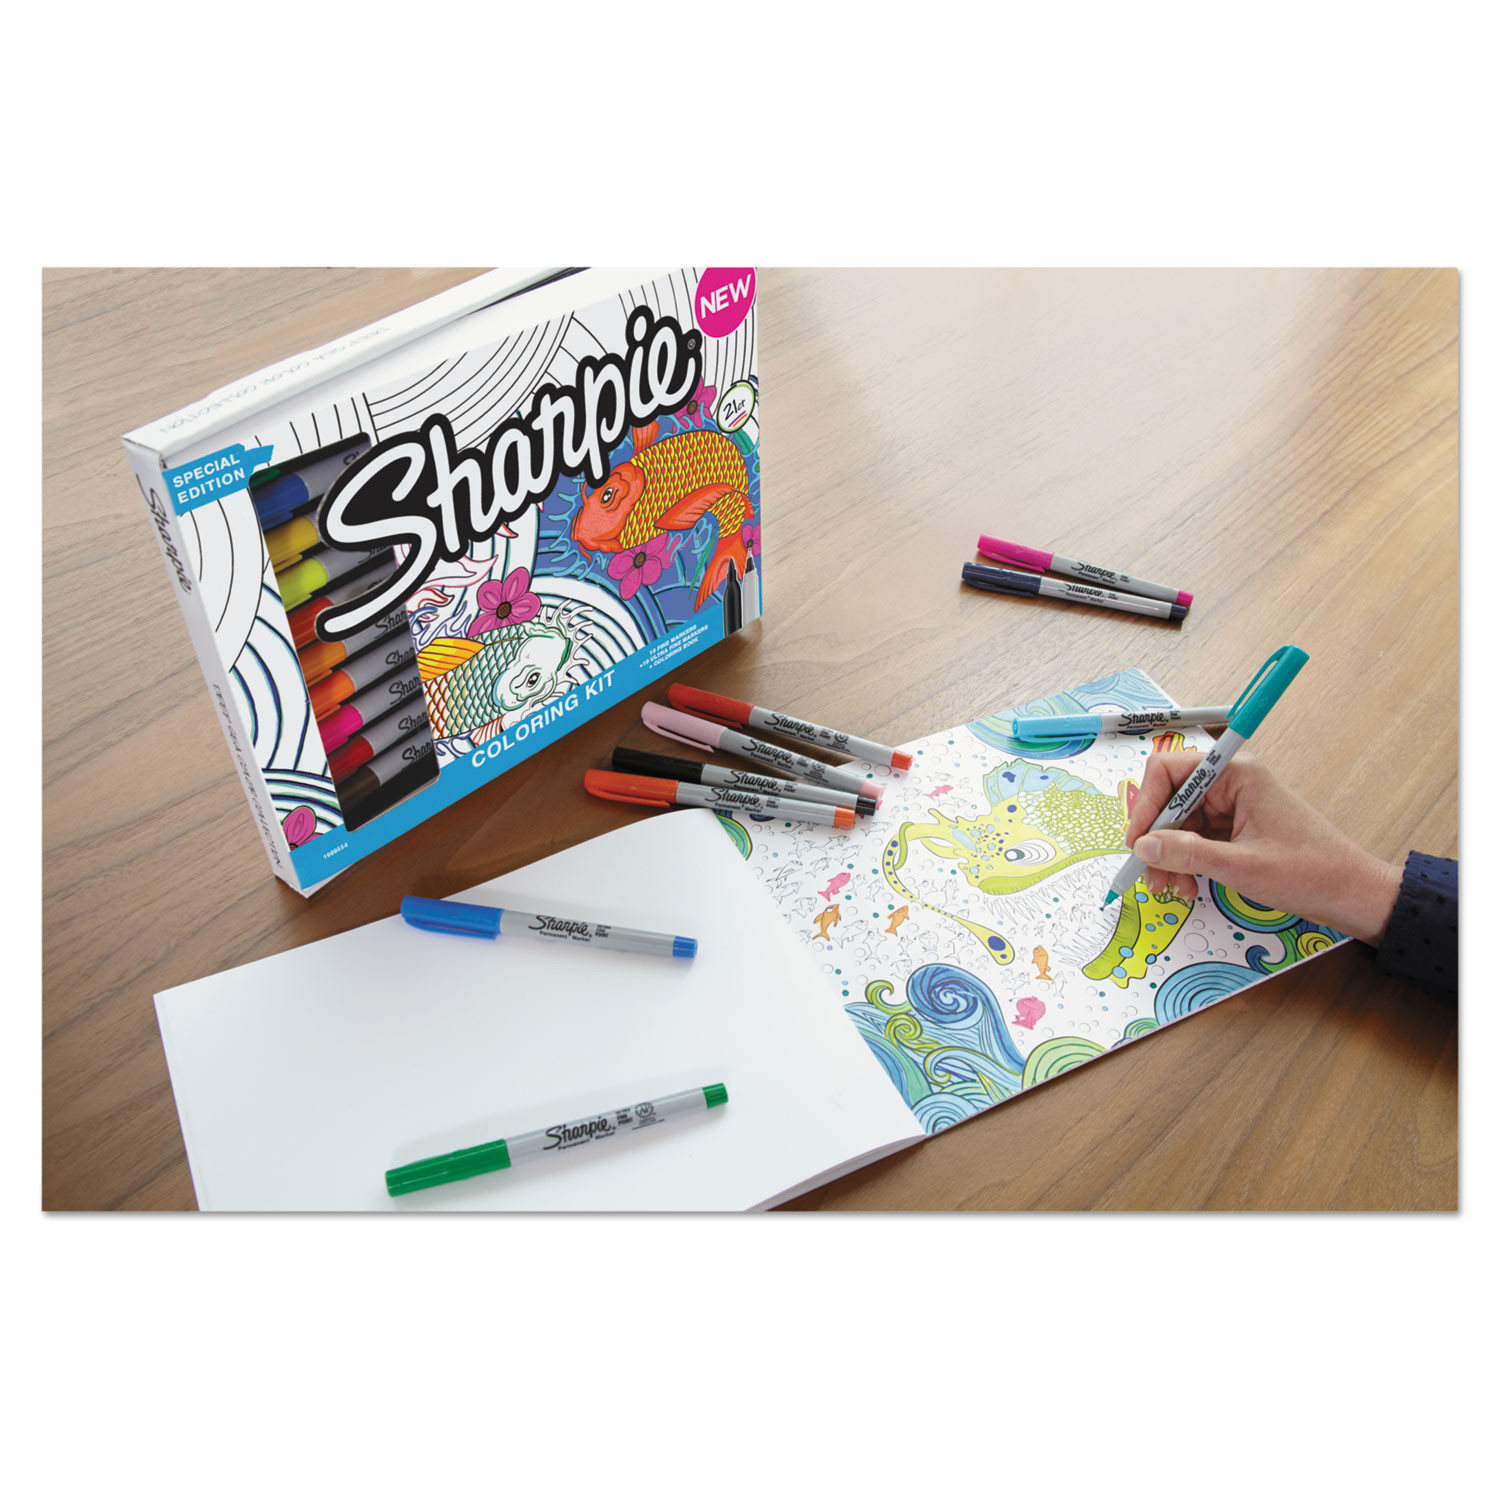 Adult Coloring Book Kit
 Adult Coloring Kit by Sharpie SAN